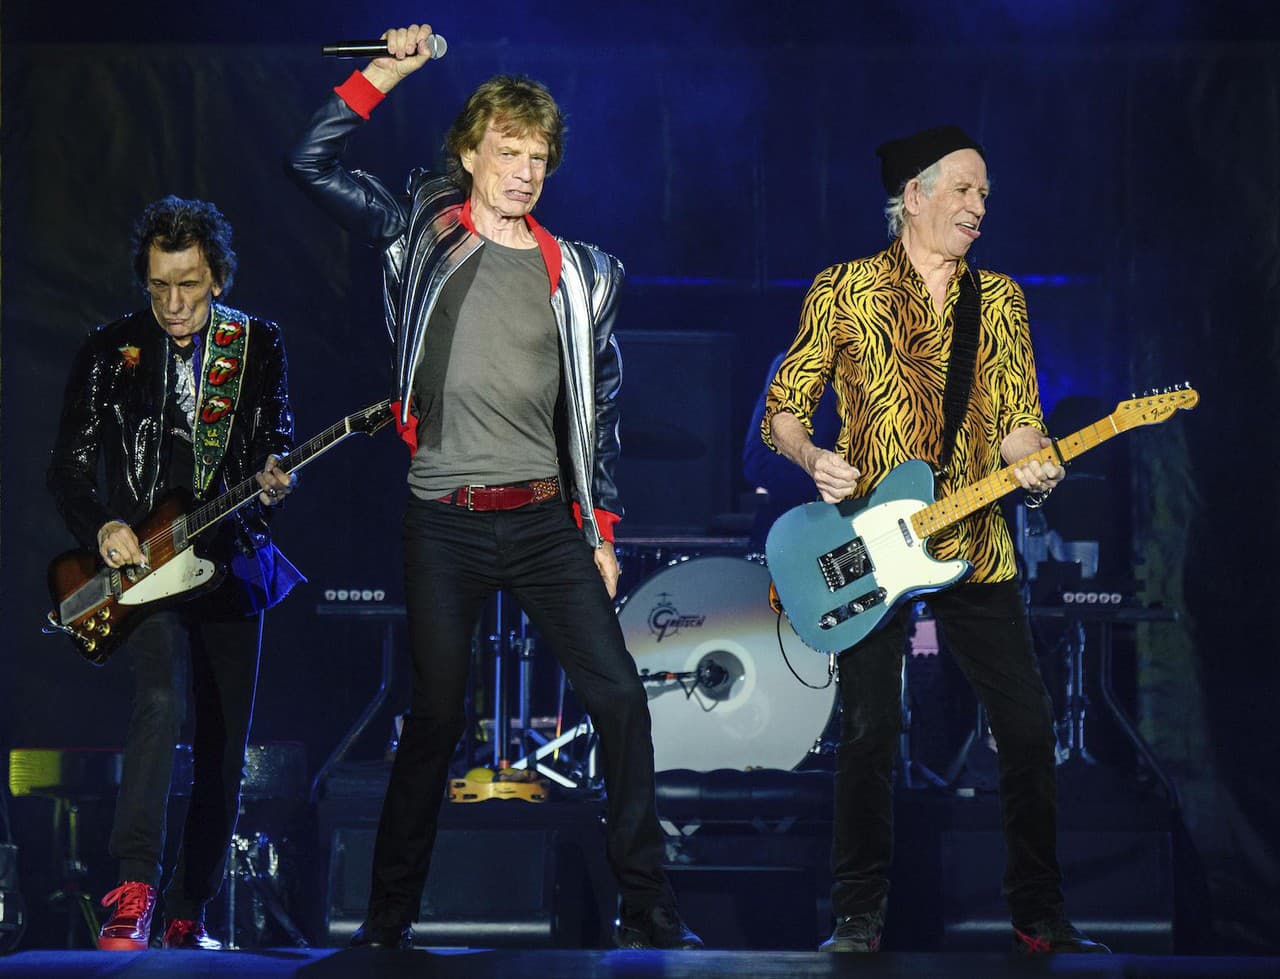 Ronnie Wood, Mick Jagger a Keith Richards, The Rolling Stones v St. Louis, 26.9.2021